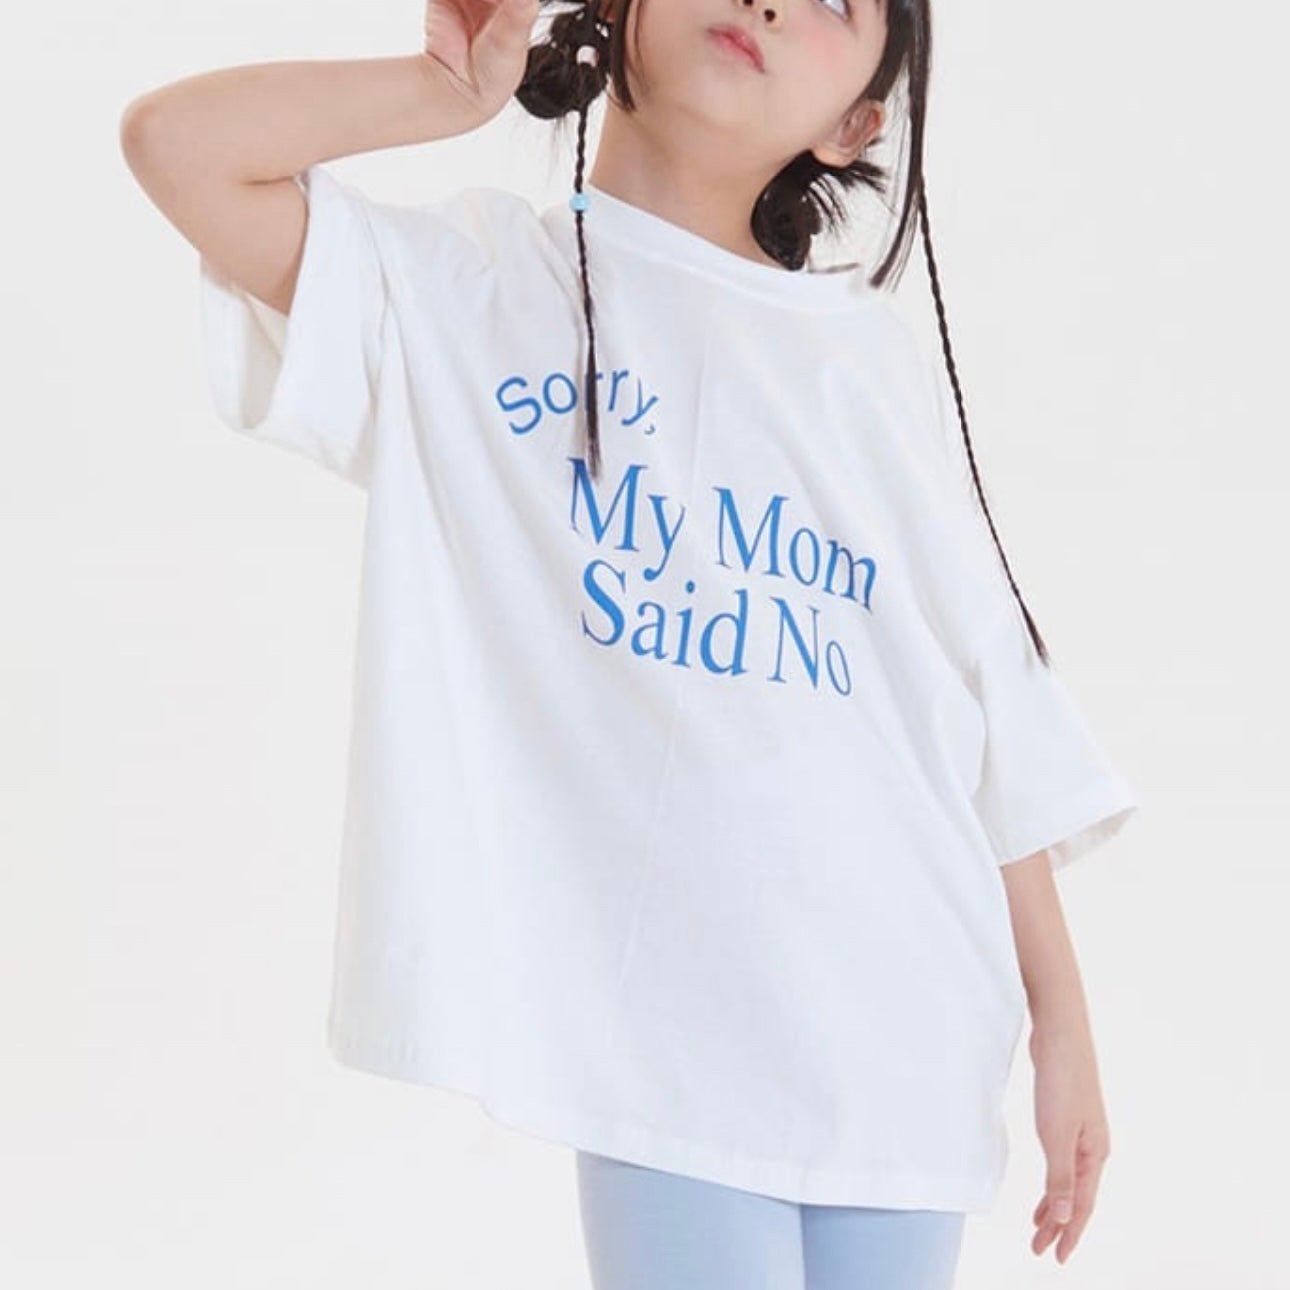 Sorry Short Sleeve Tee find Stylish Fashion for Little People- at Little Foxx Concept Store